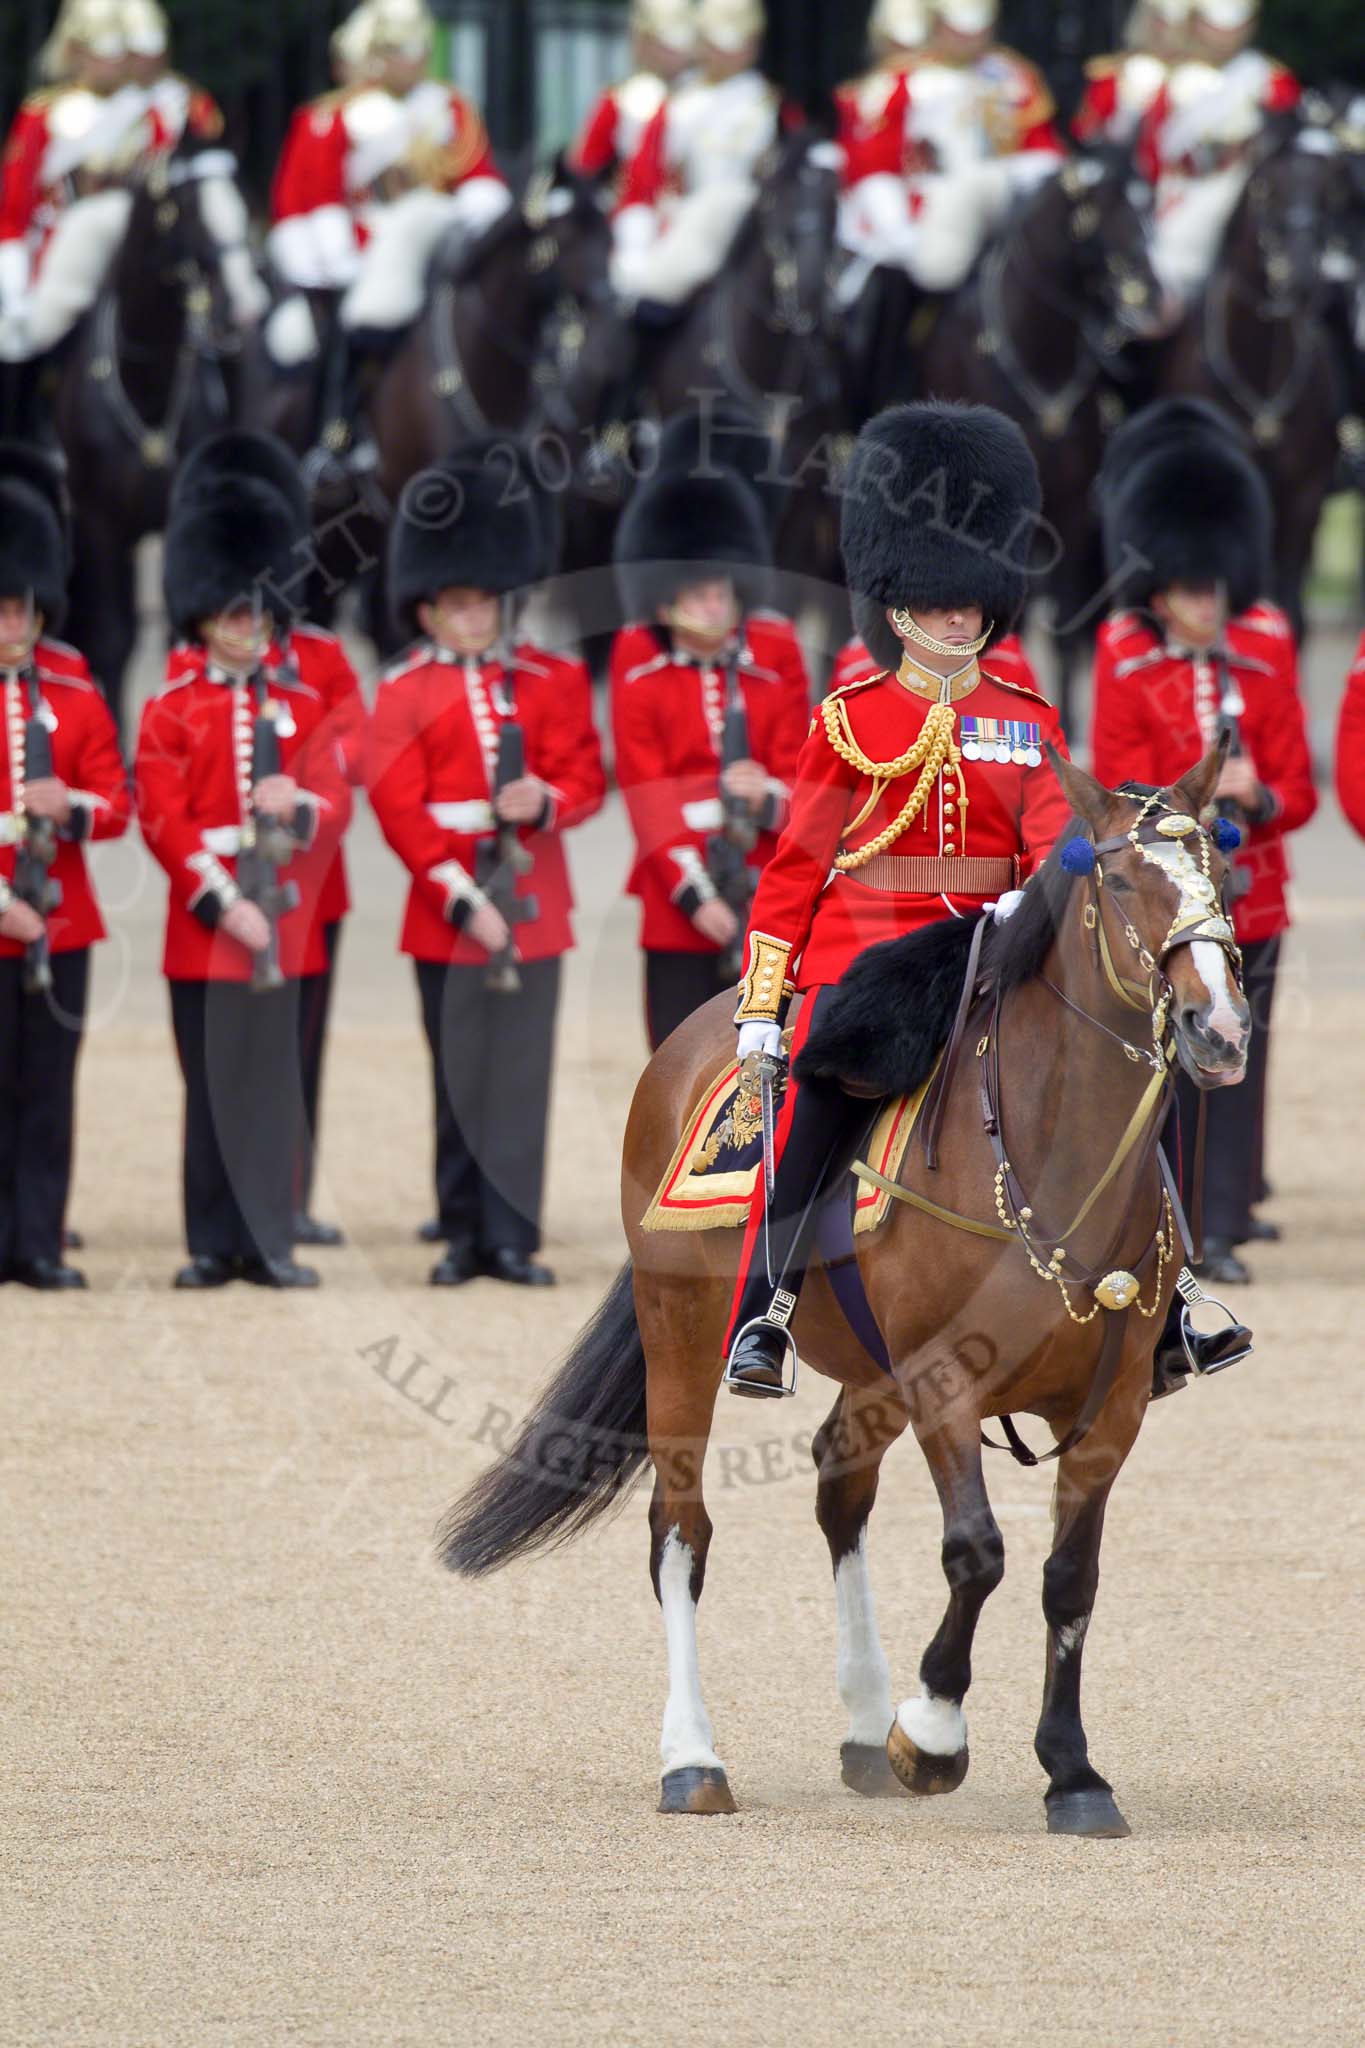 Trooping the Colour 2010: Lt Col C R V Walker, Grenadier Guards, Field Officer in Brigade Waiting and in command of the parade..
Horse Guards Parade, Westminster,
London SW1,
Greater London,
United Kingdom,
on 12 June 2010 at 11:26, image #128